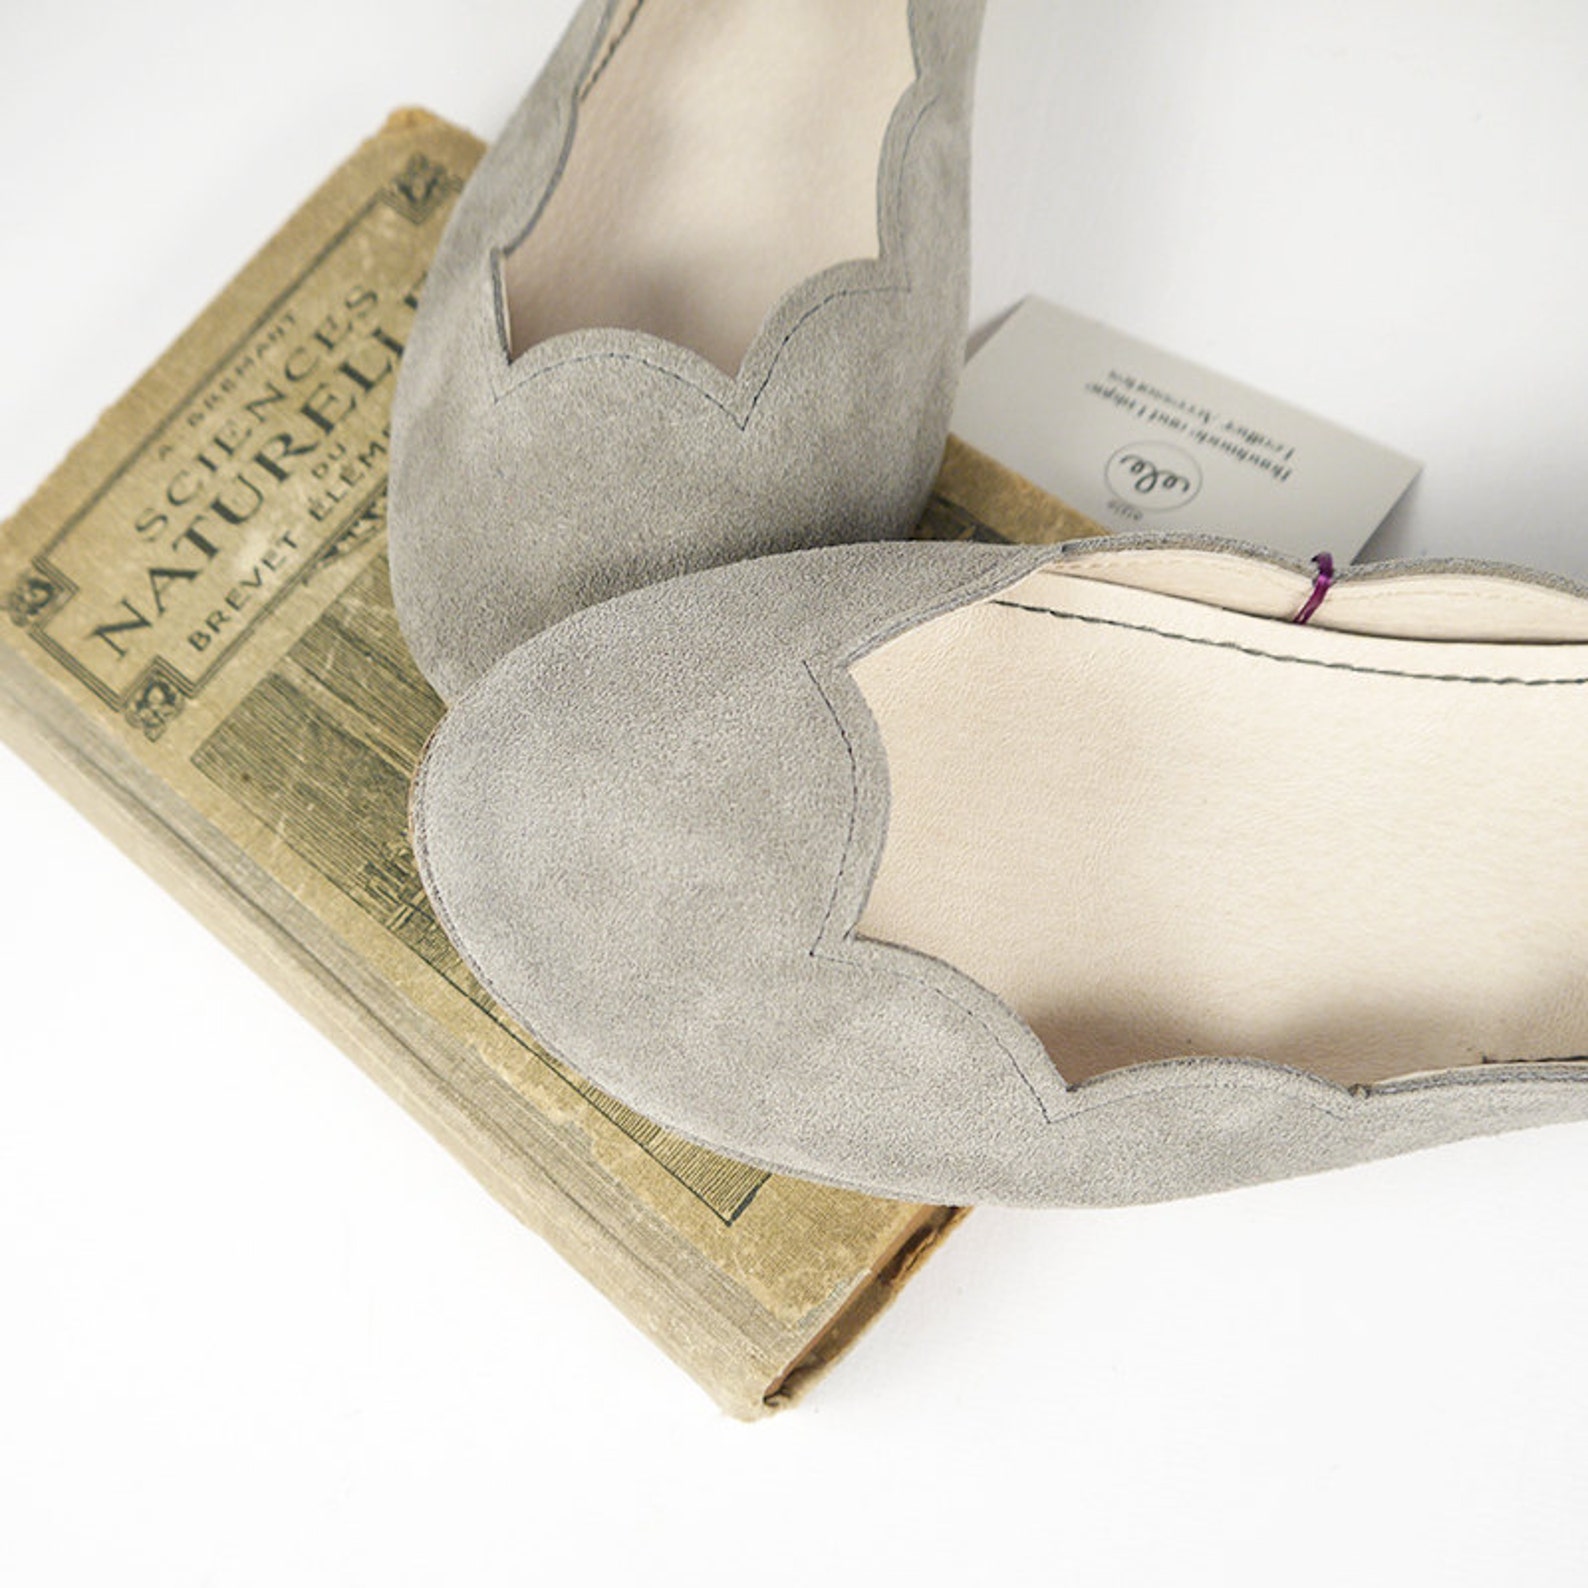 leather shoes. ballet flats shoes. pearl wedding shoes. bridal low heel. brautschuhe. leather flats. scalloped gray flats. handm